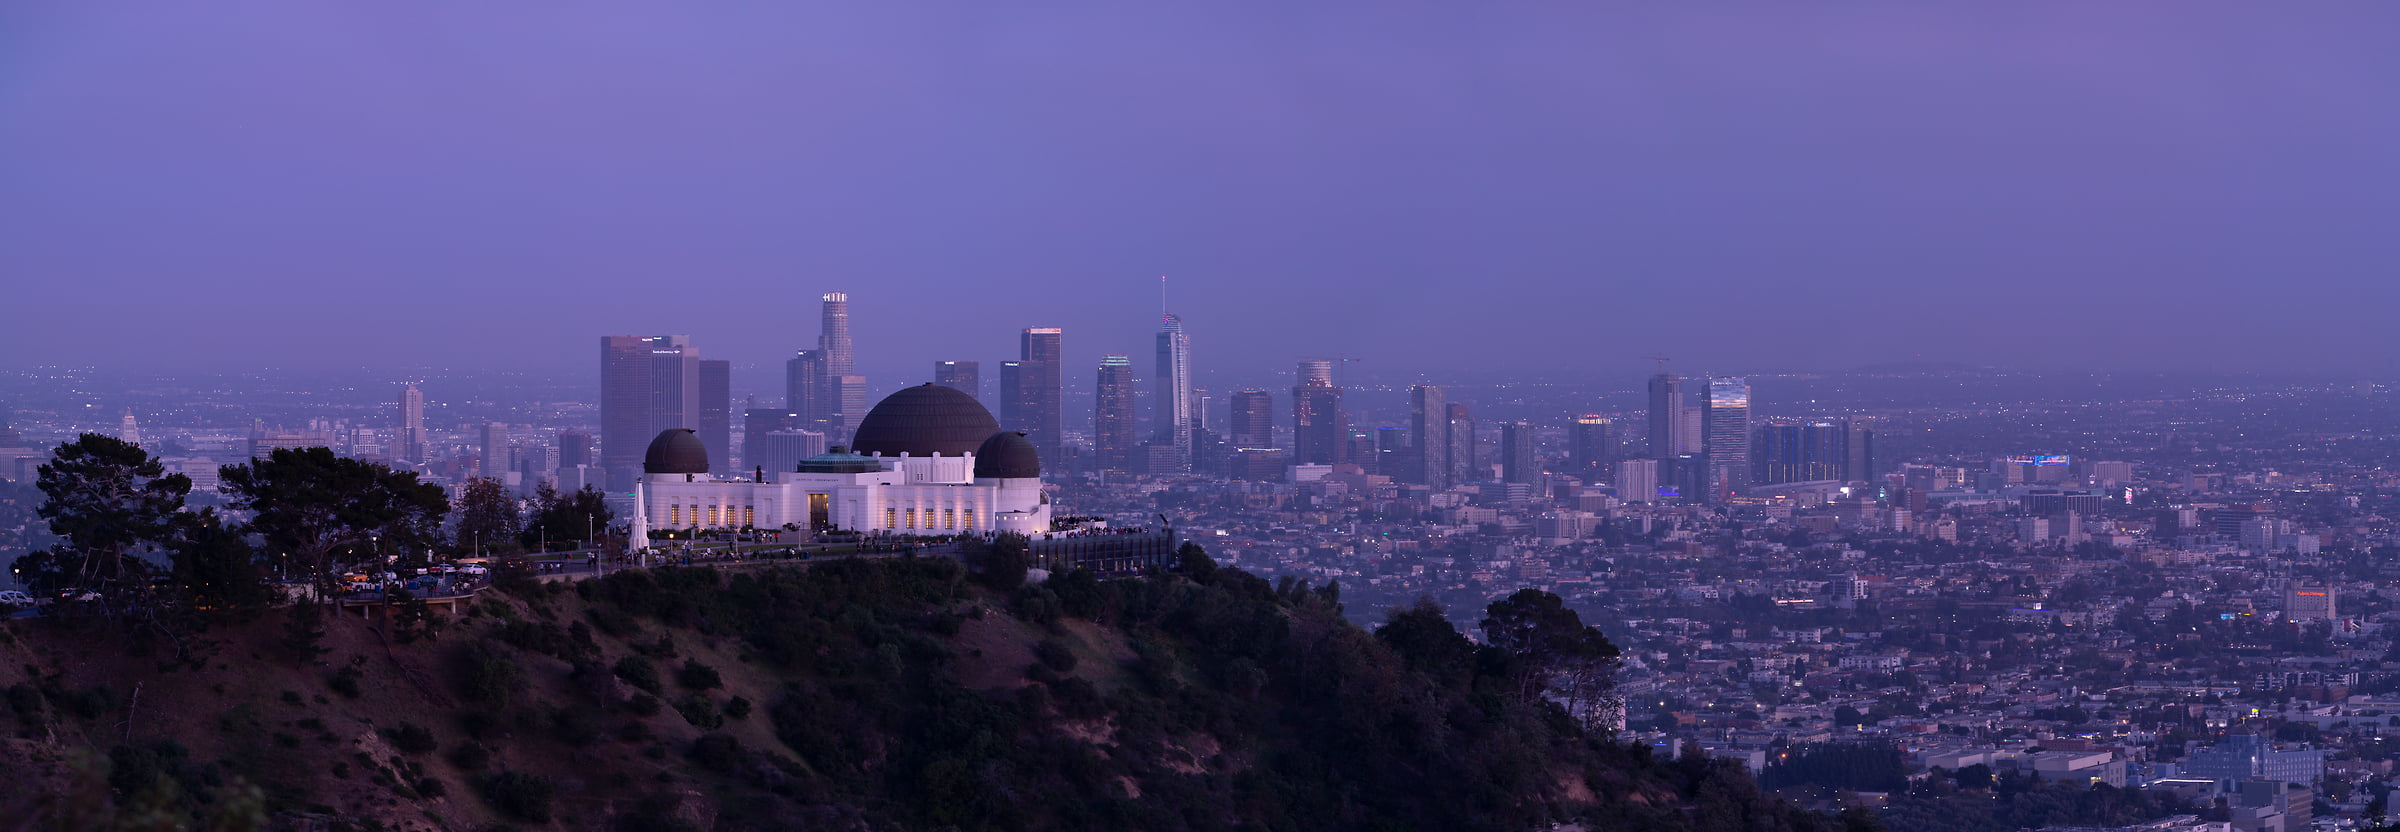 333 megapixels! A very high resolution, large-format VAST photo print of Griffith Park at night; landscape photograph created by Greg Probst in Griffith Park, Los Angeles